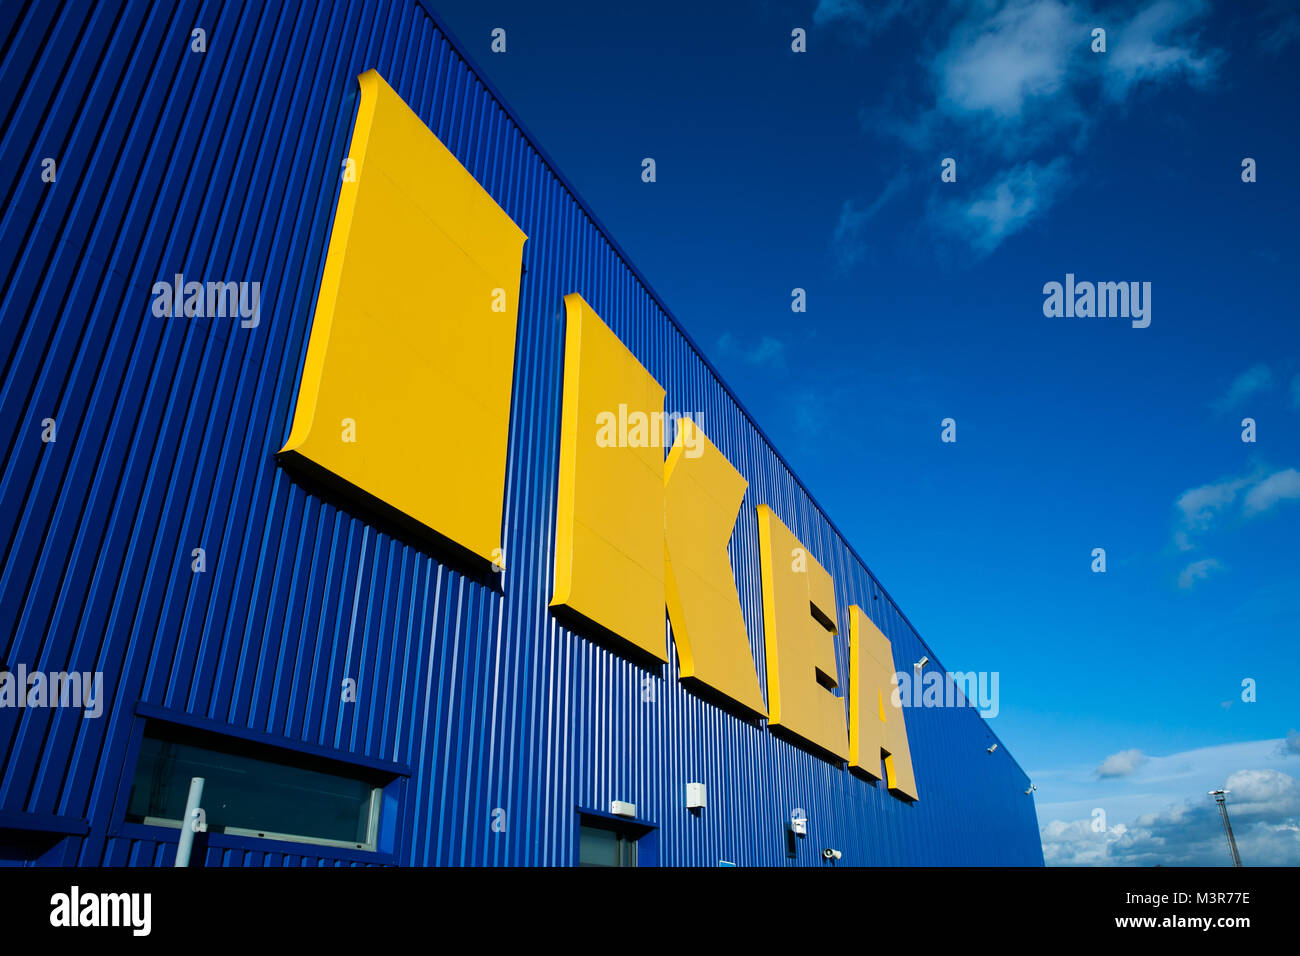 Front of IKEA store with large yellow letters. Taken 12th February 2018 after IKEA founder Ingvar Kamprad died aged 91. Stock Photo